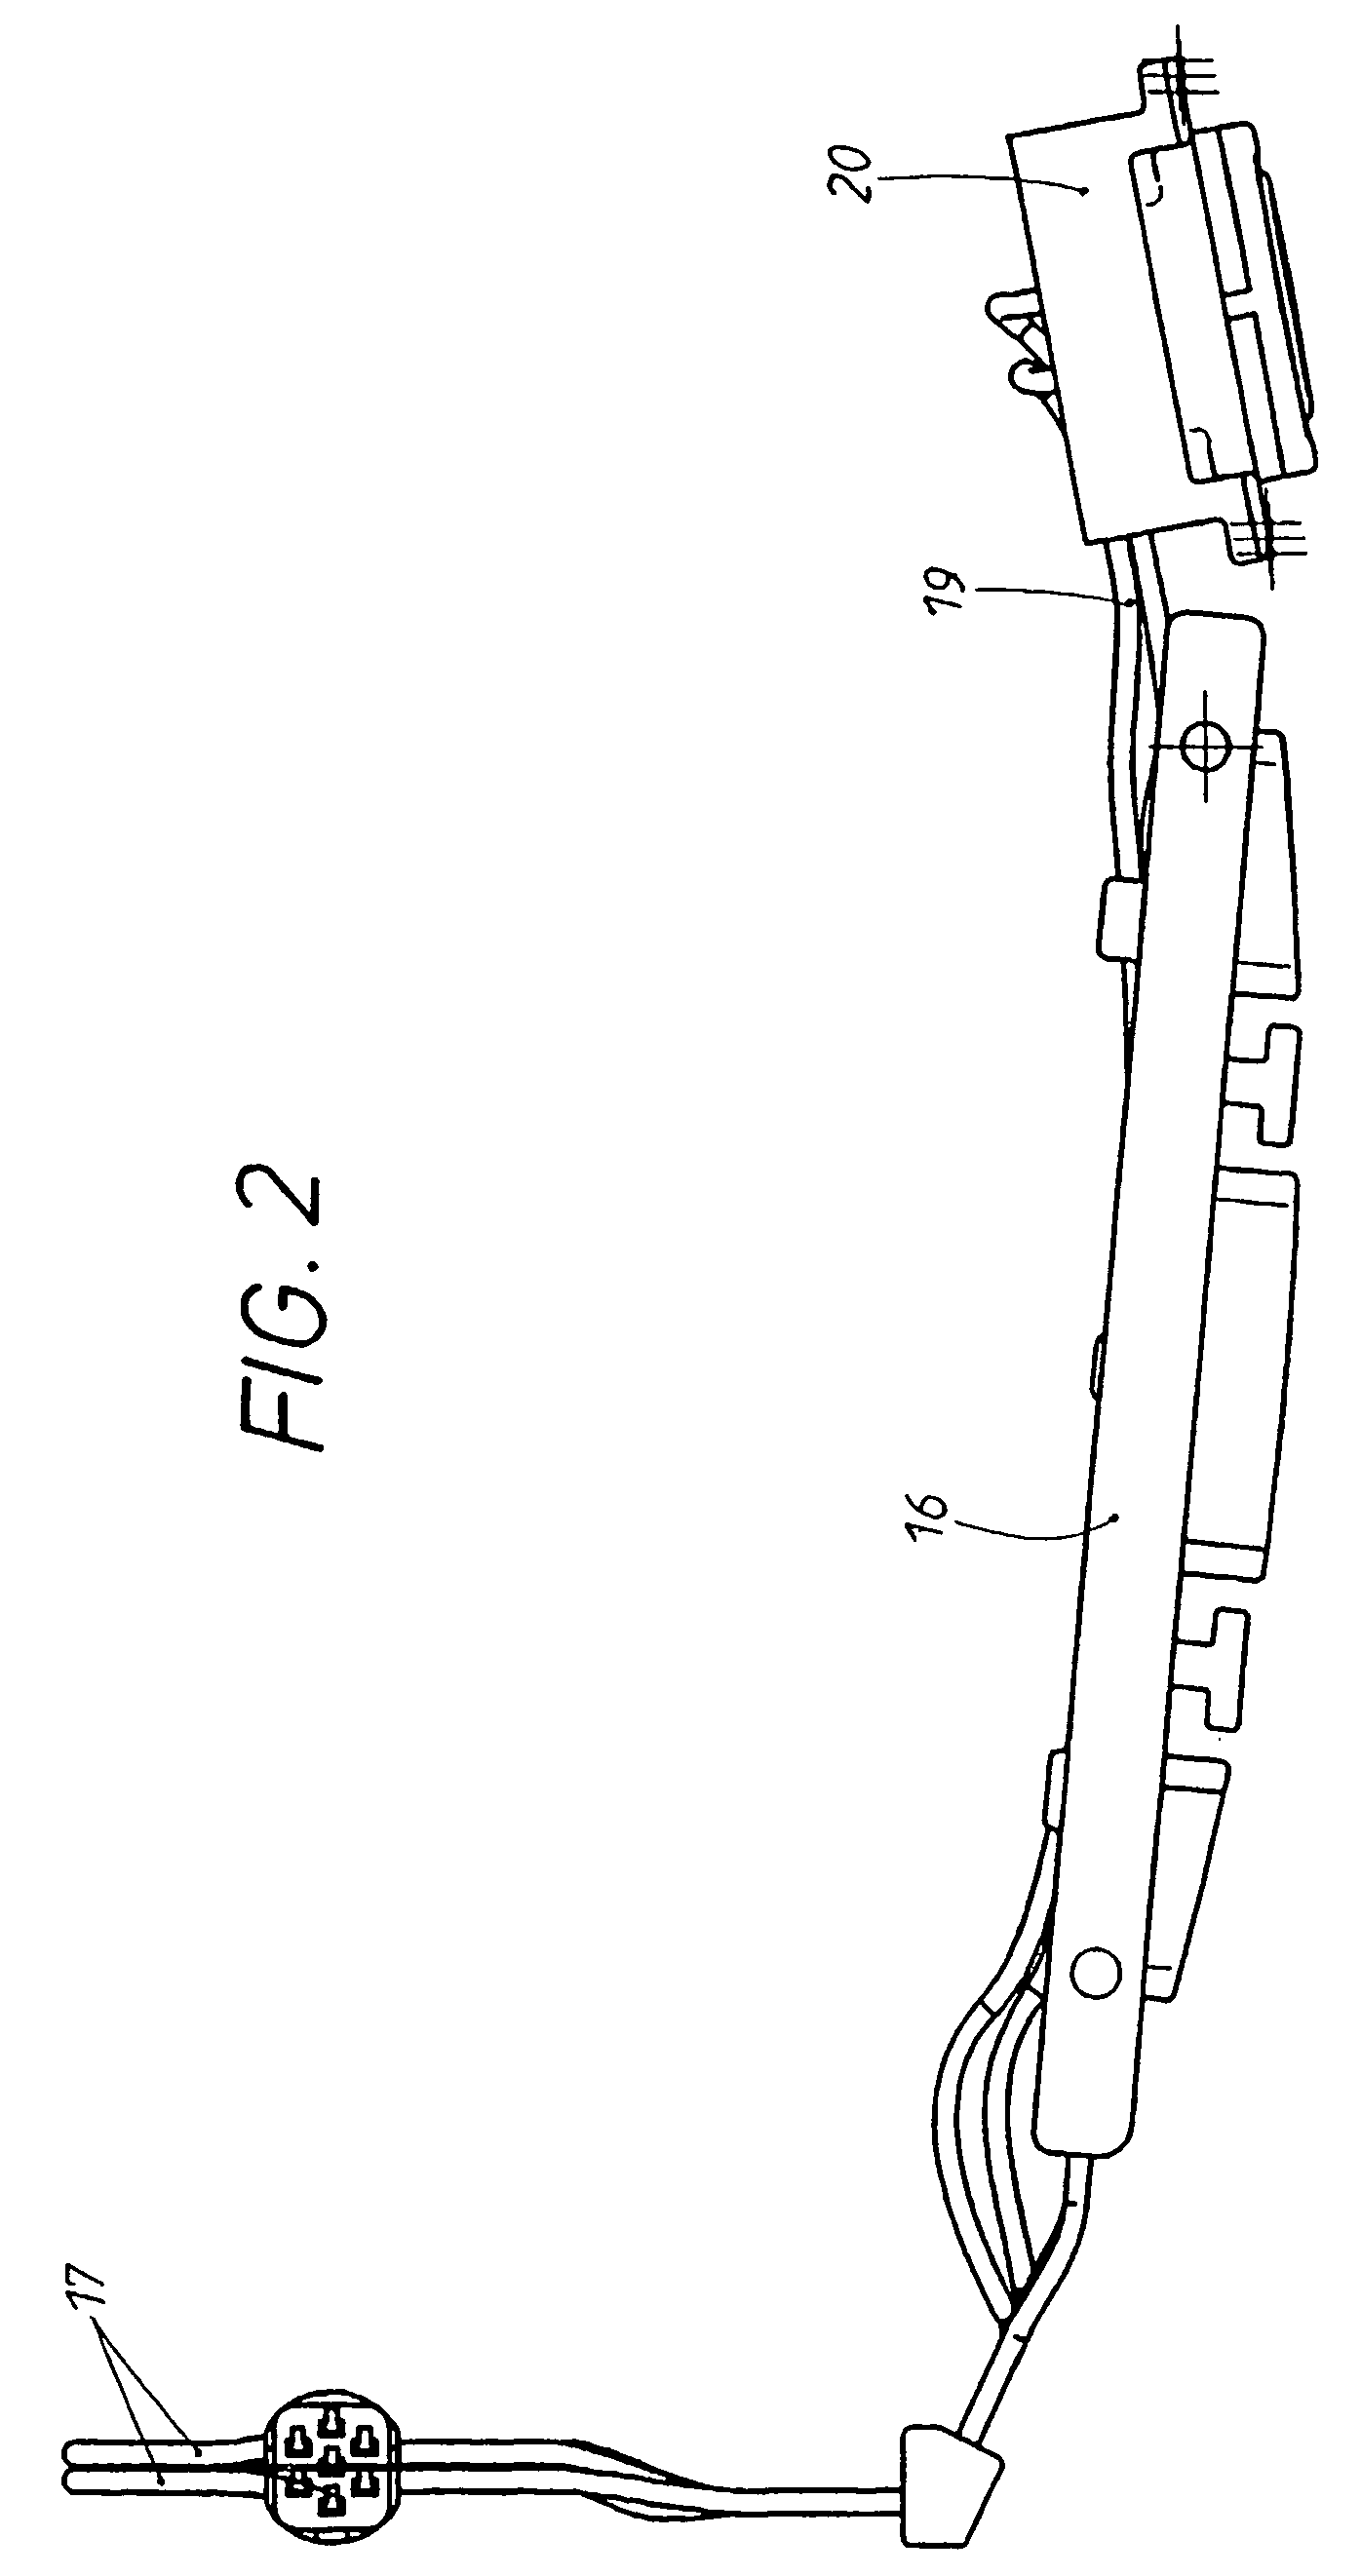 Handle for doors or hinged flaps of vehicles